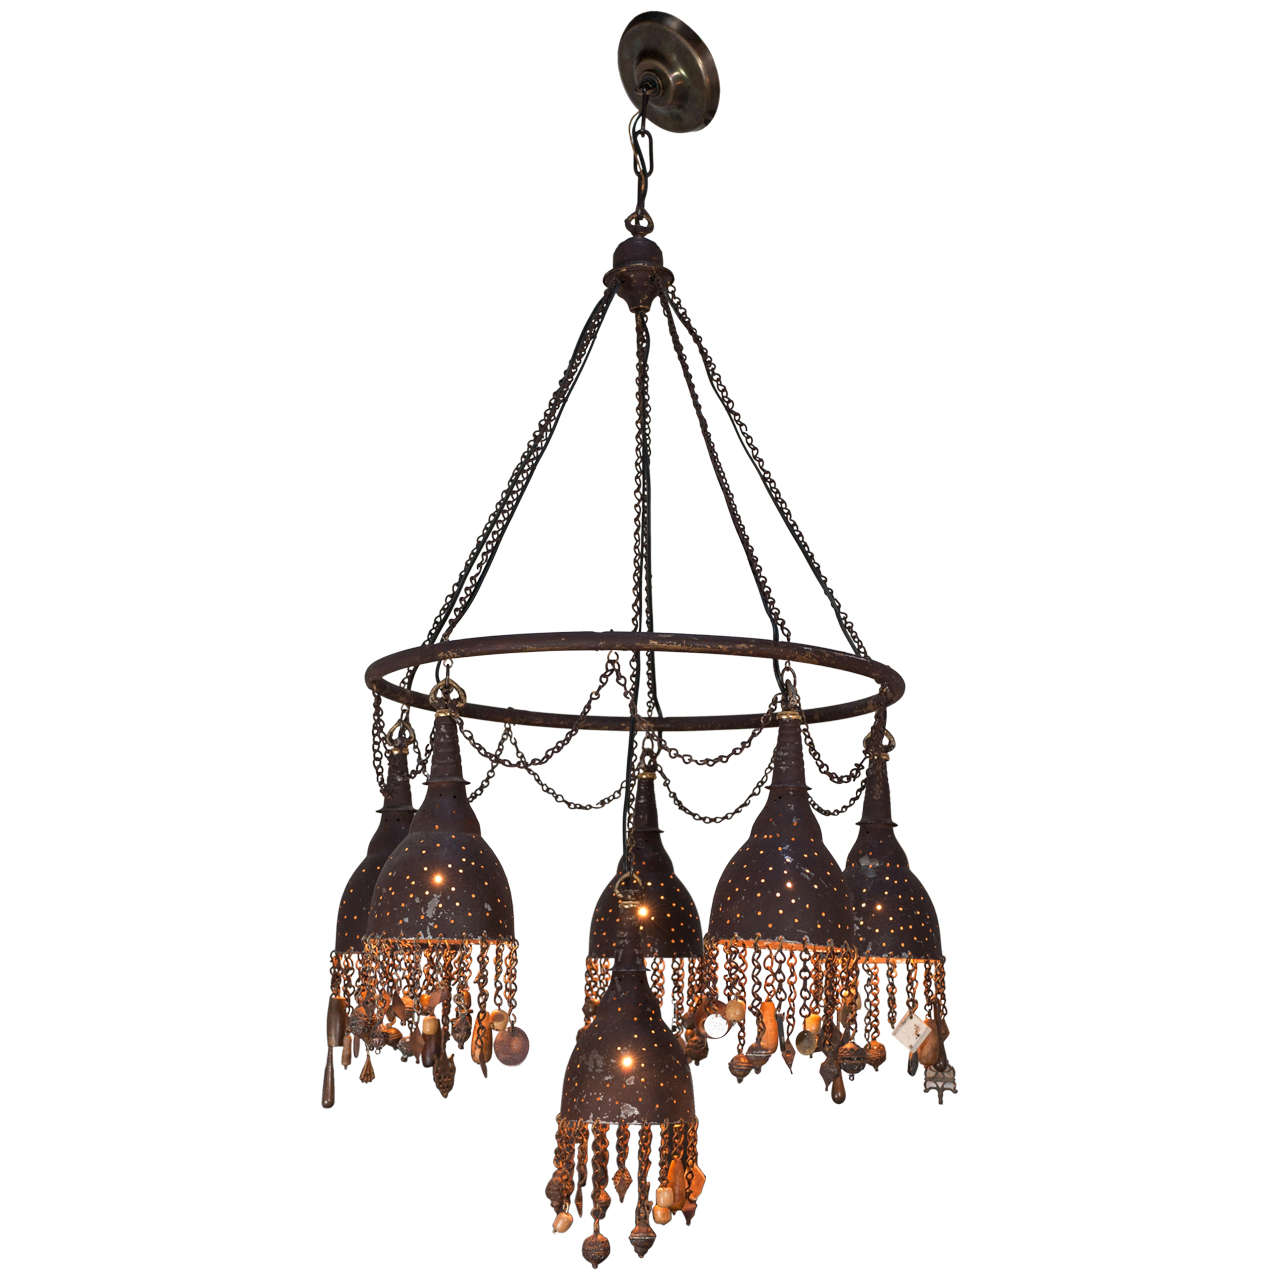 20th Century Moroccan Metal Chandelier, c. 1940 For Sale